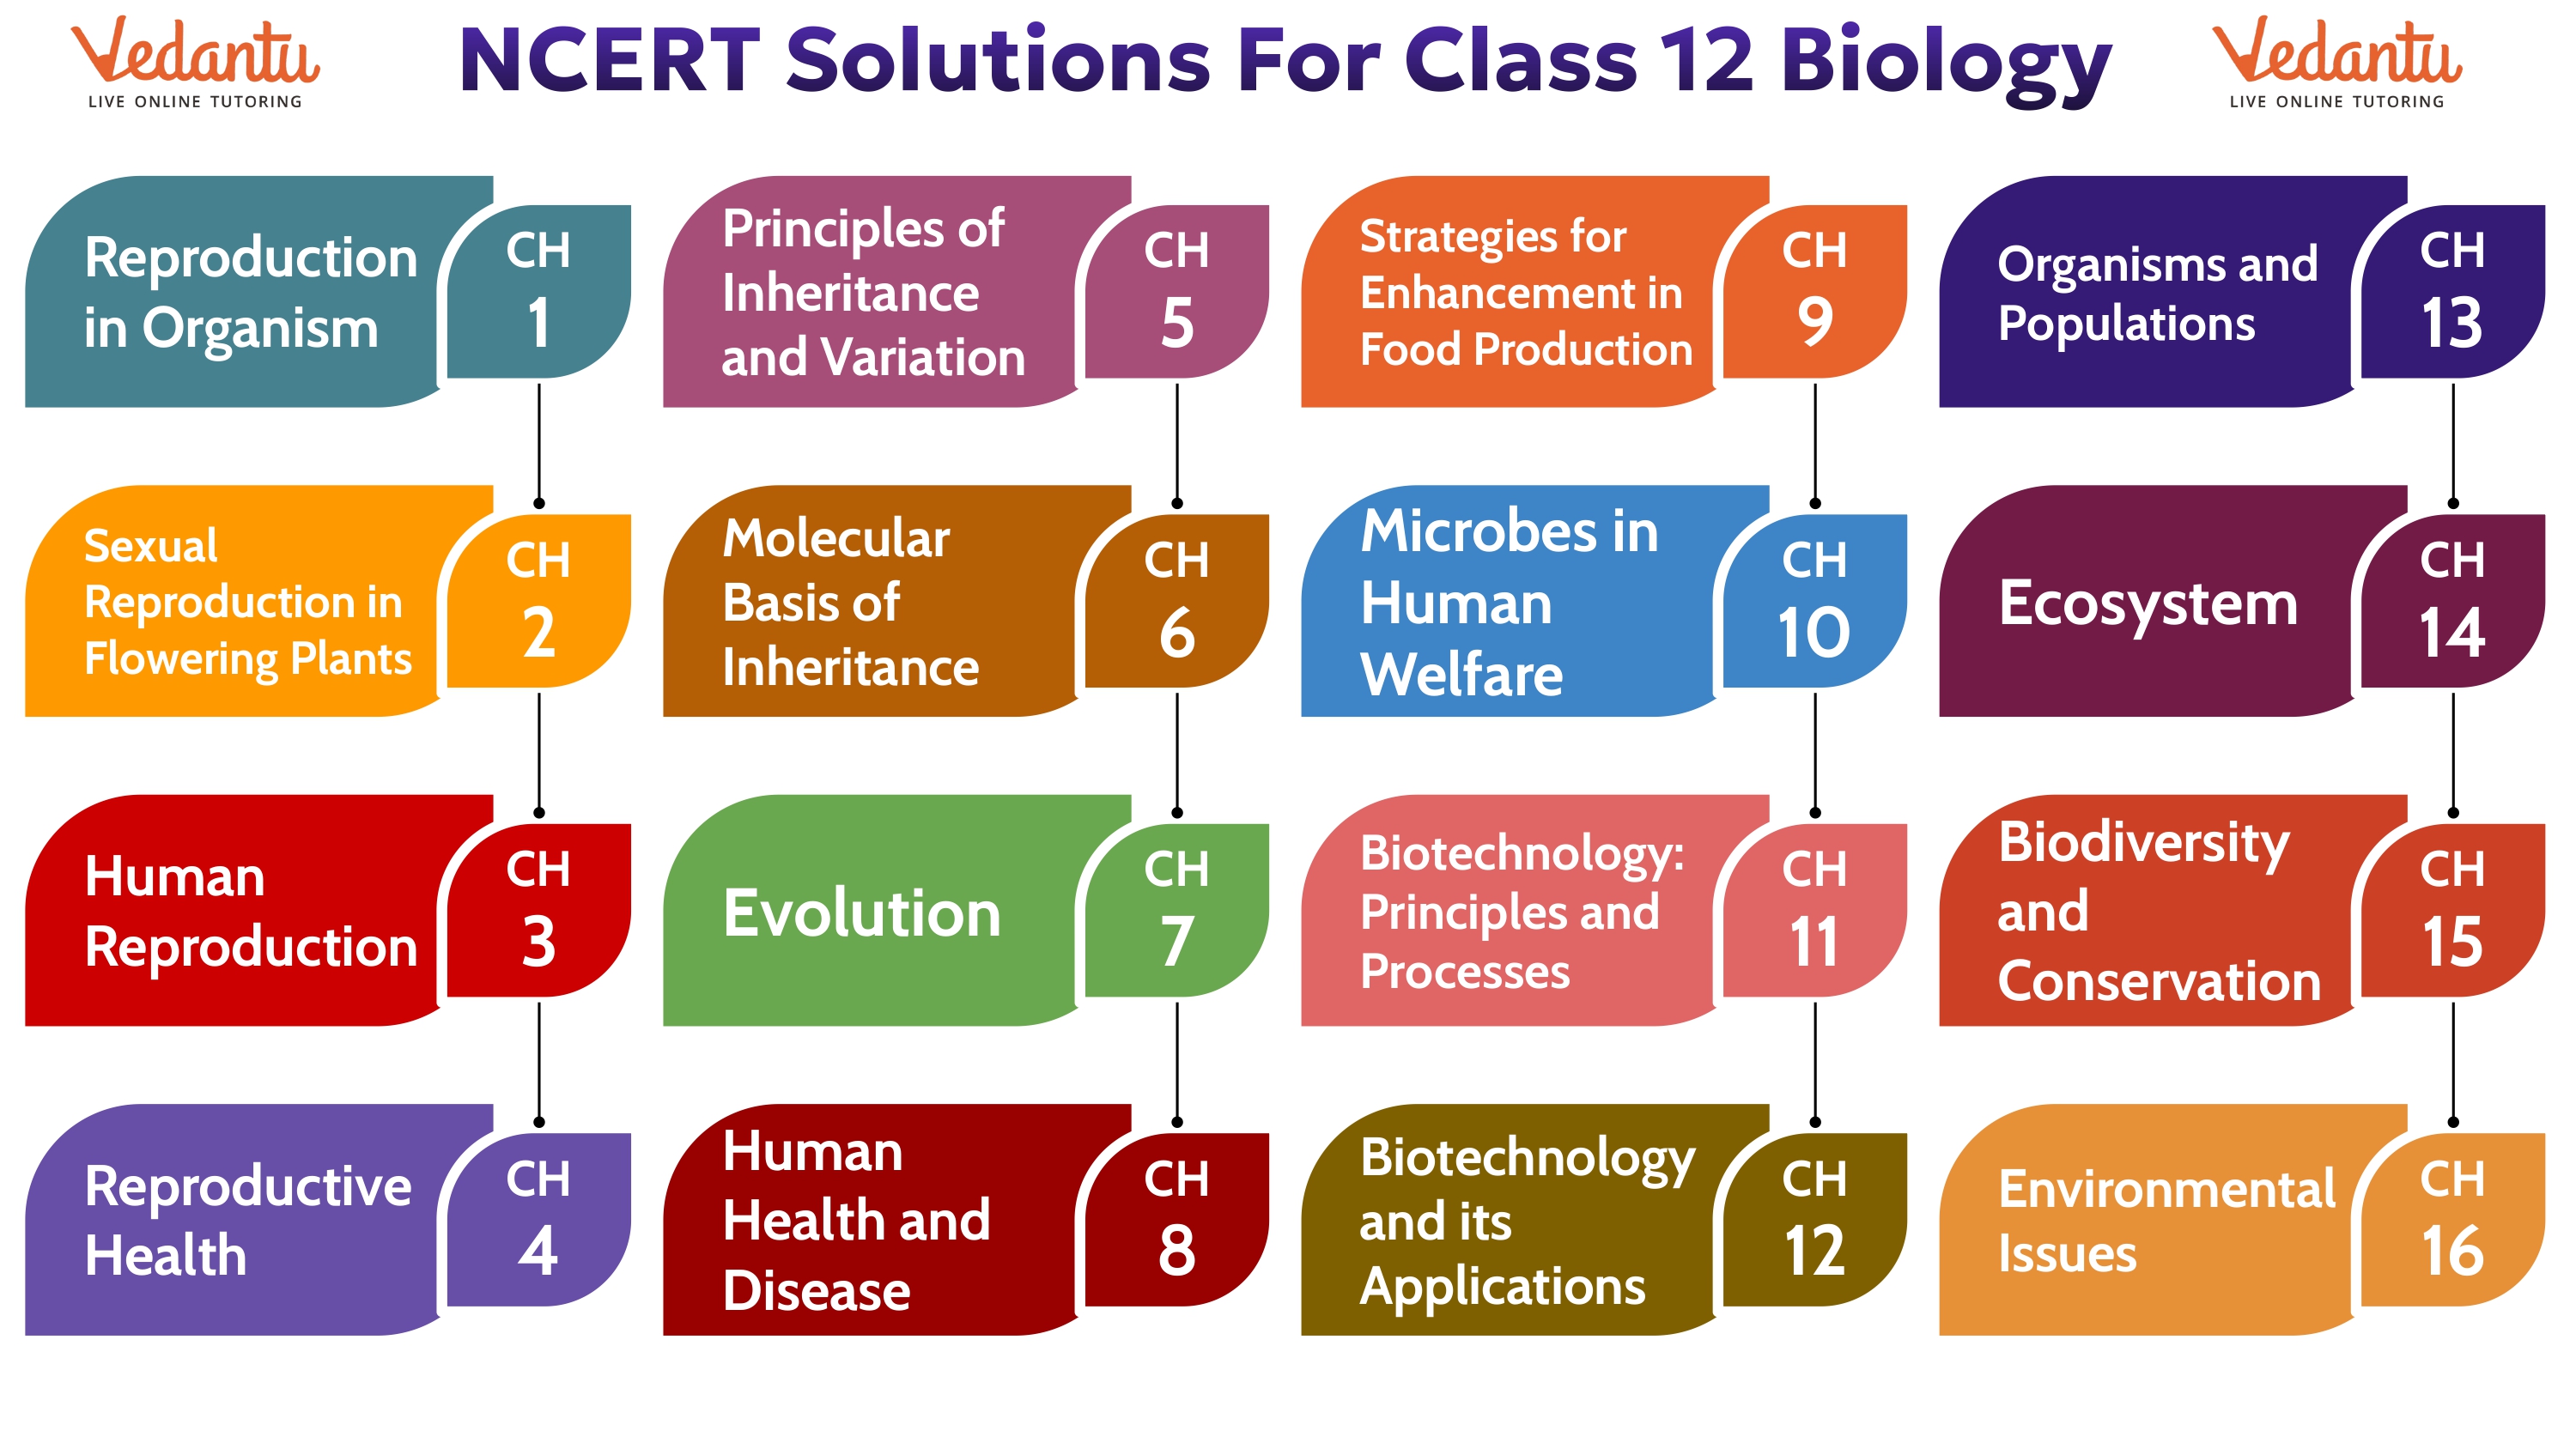 NCERT Biology Class 12 Chapter-wise Overview